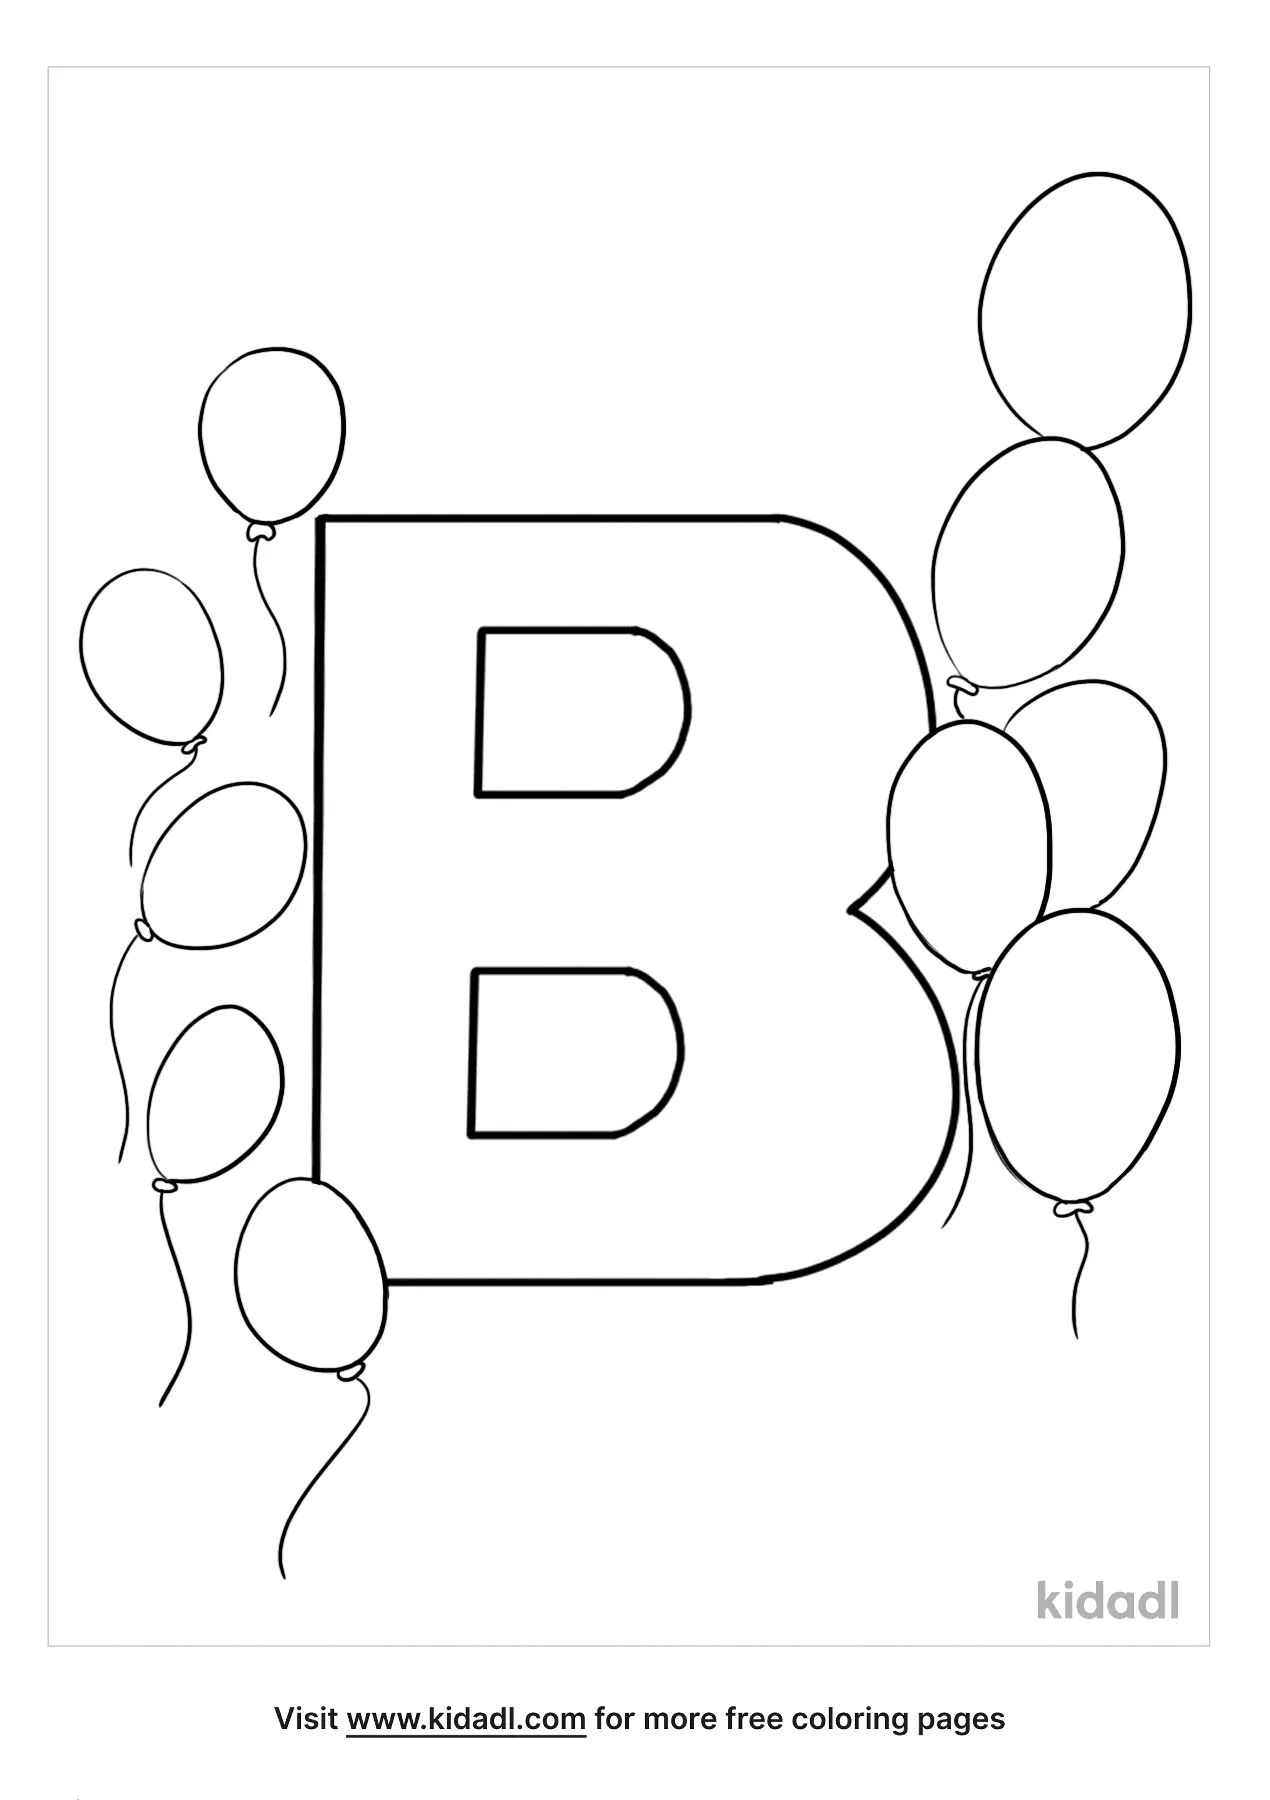 coloring-page-letter-b-home-interior-design